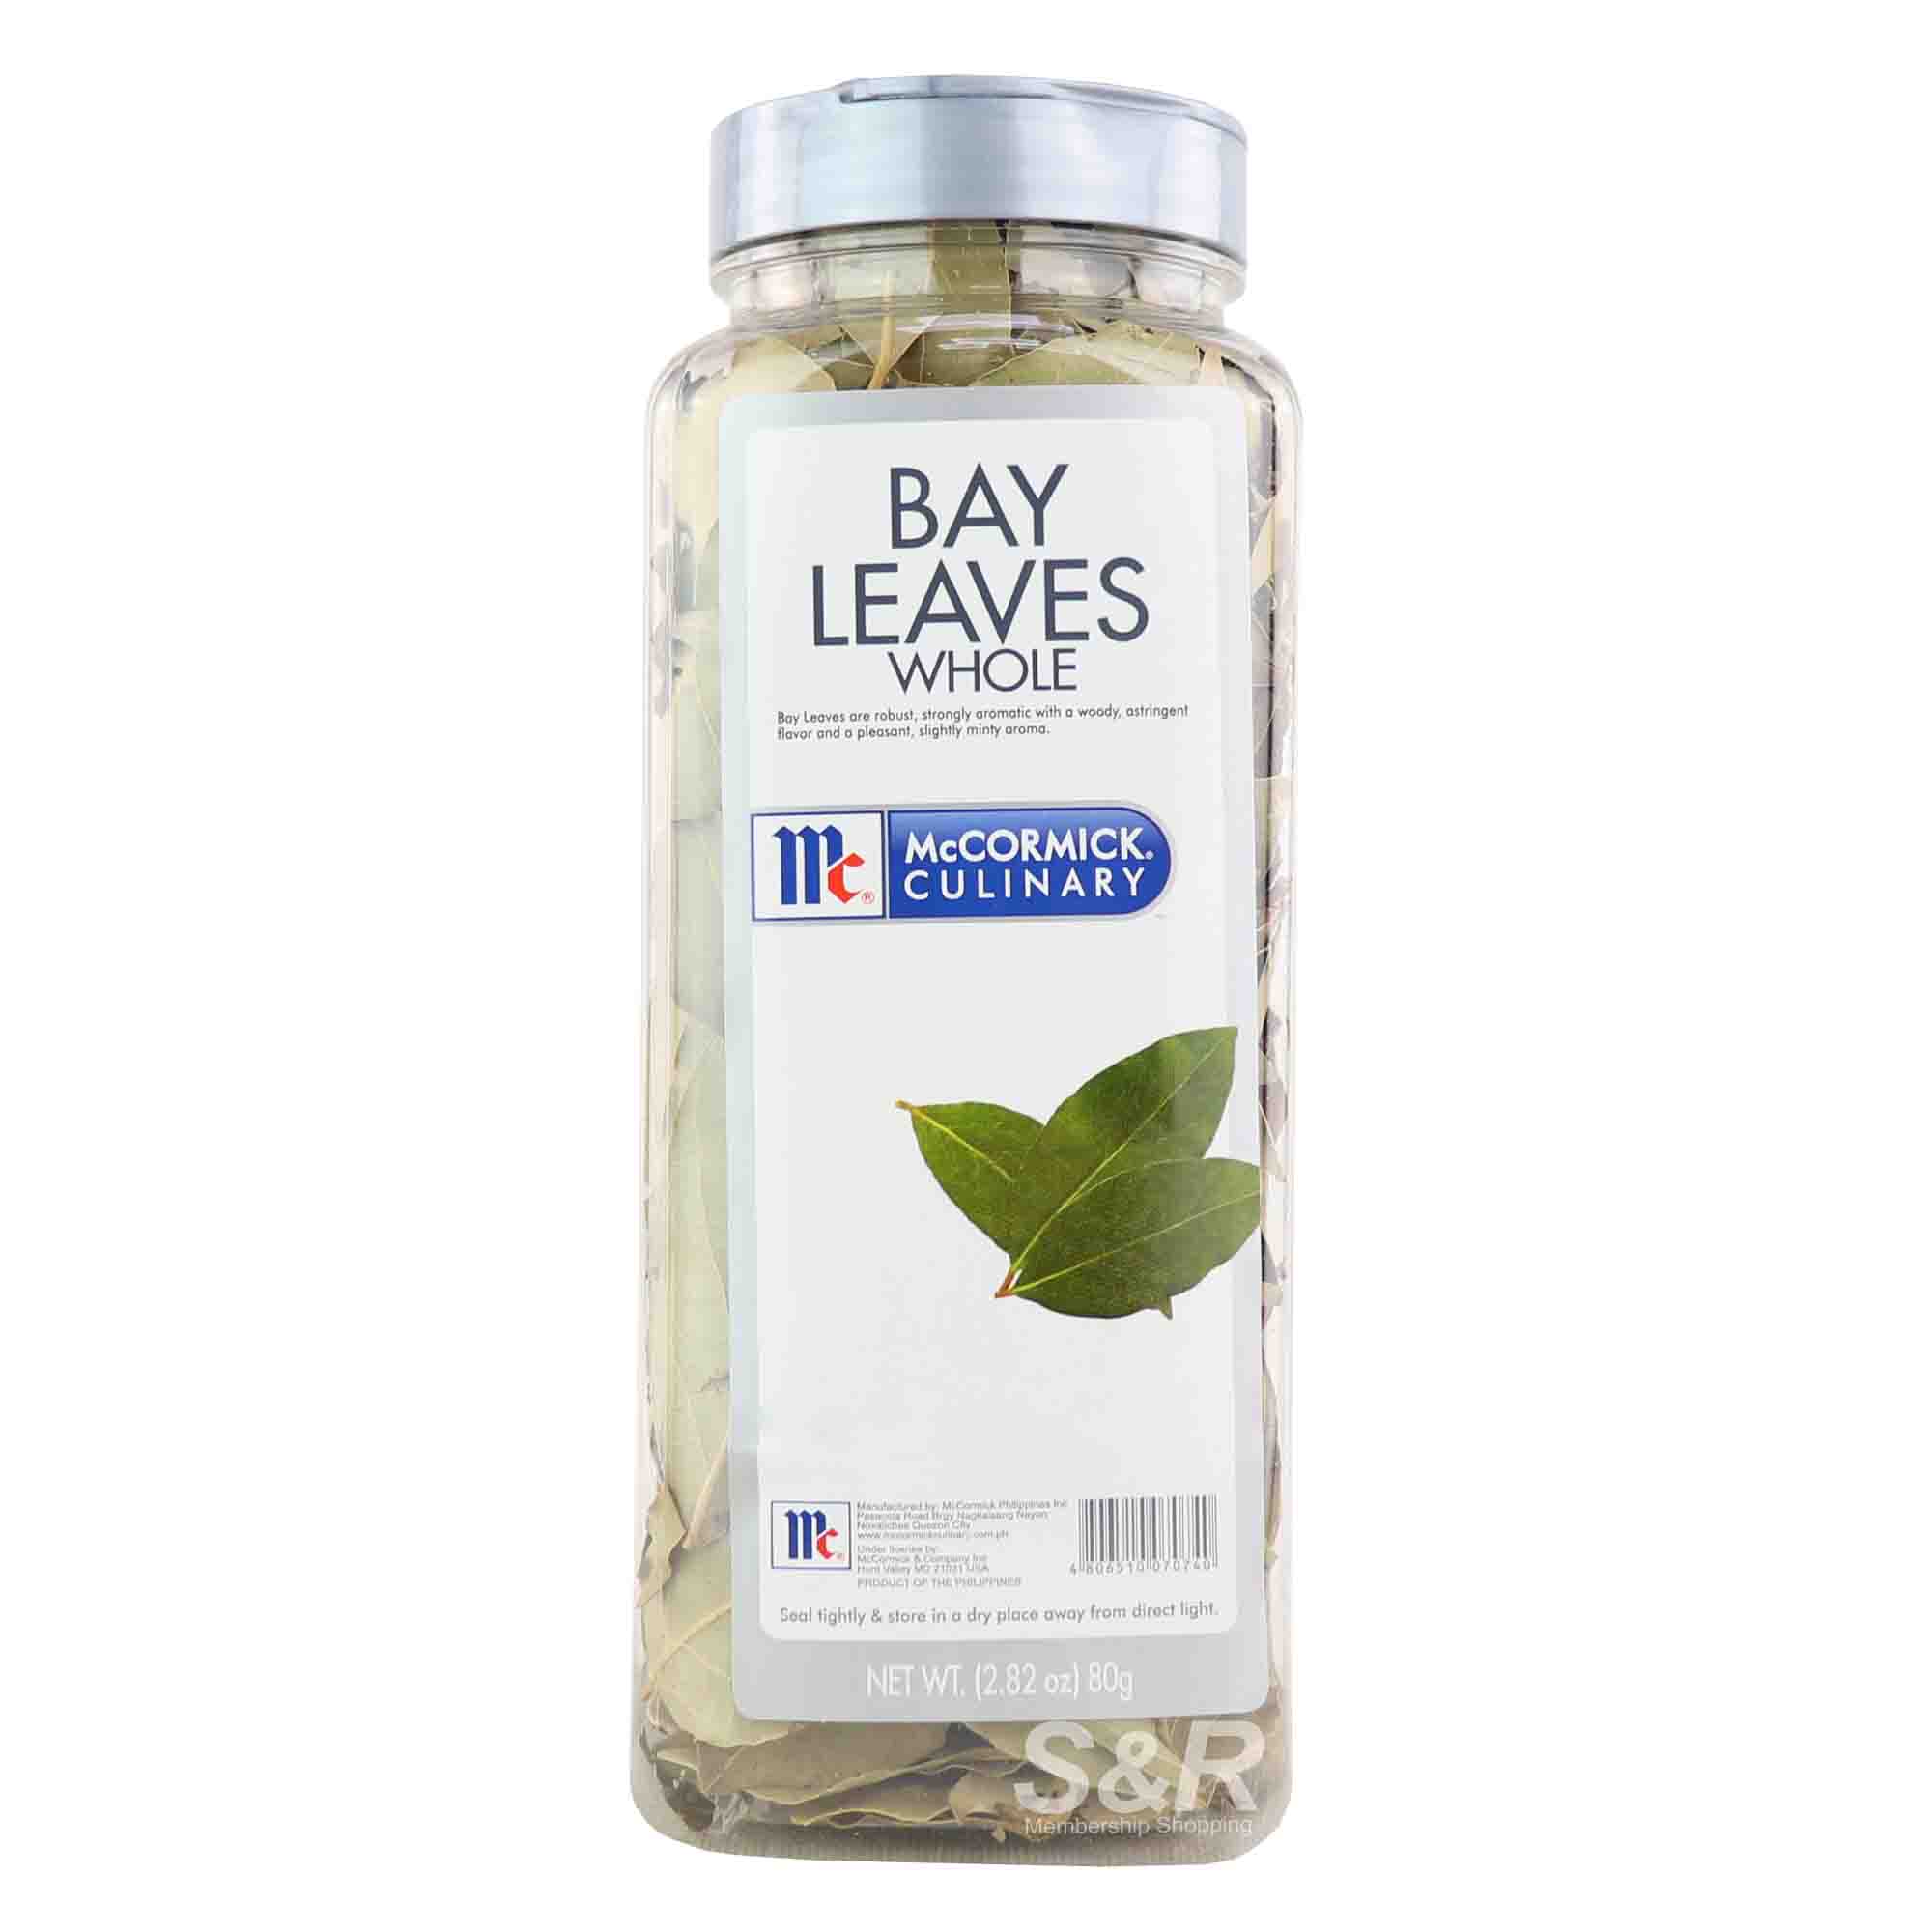 McCormick Culinary Whole Bay Leaves 80g